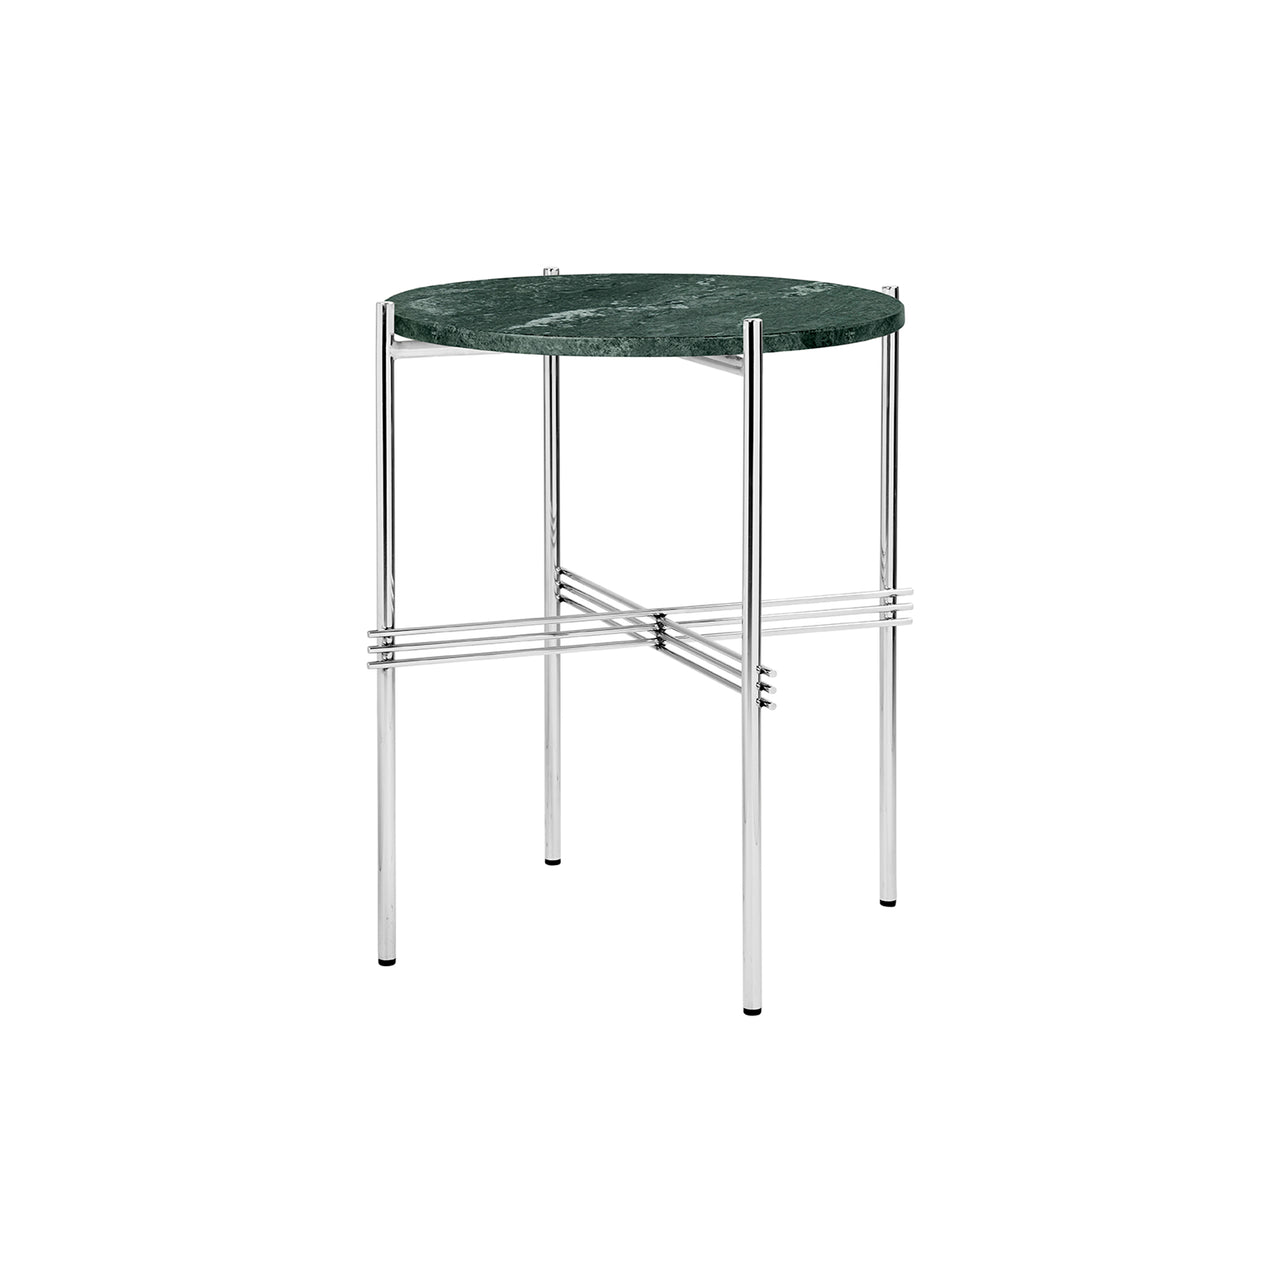 TS Round Side Table: Polished Steel + Green Guatemala Marble